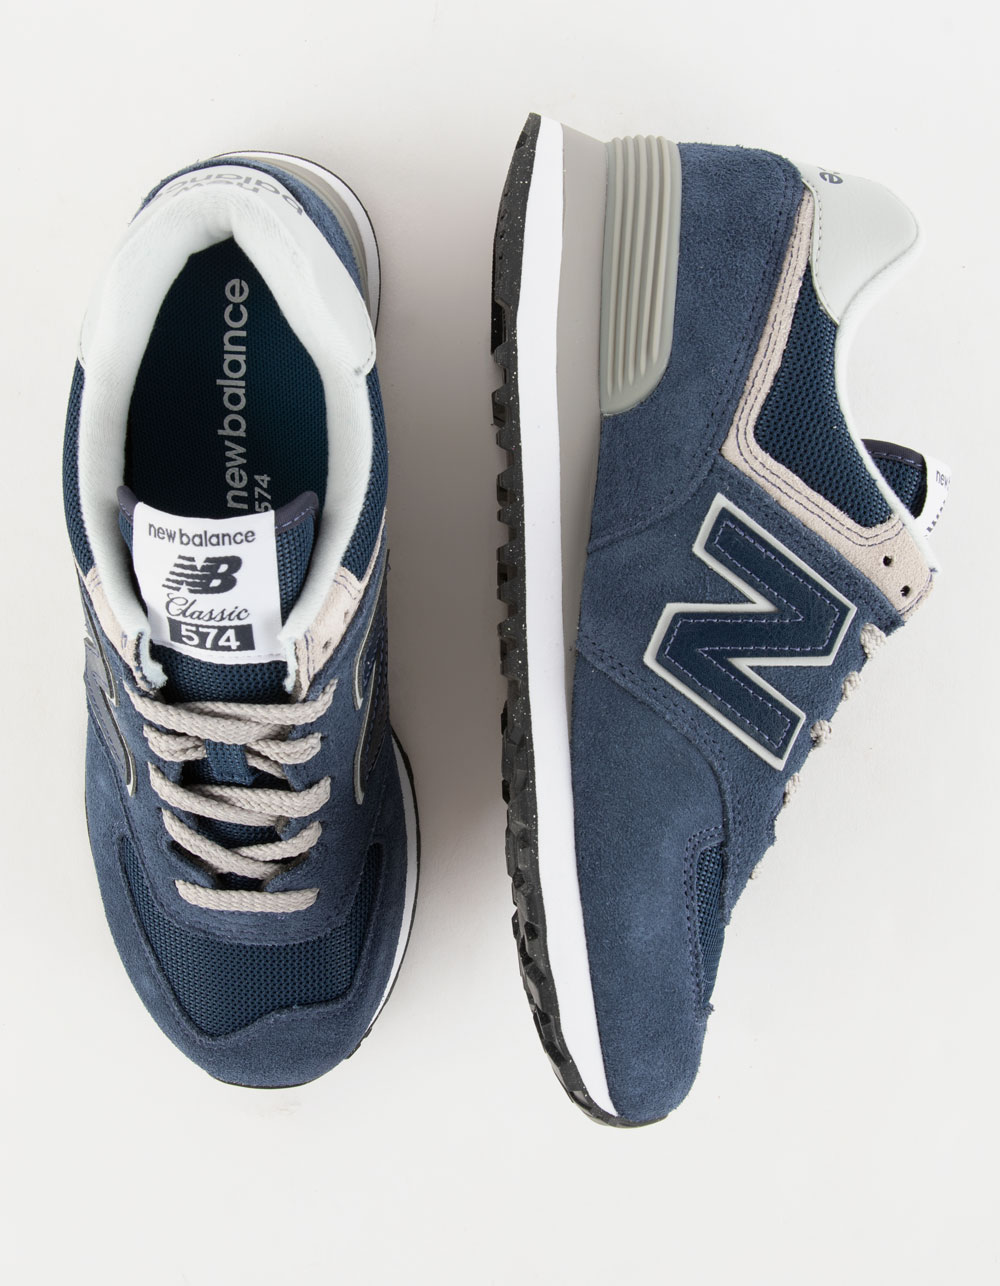 NEW BALANCE 574 Womens Shoes - NAVY/WHITE | Tillys